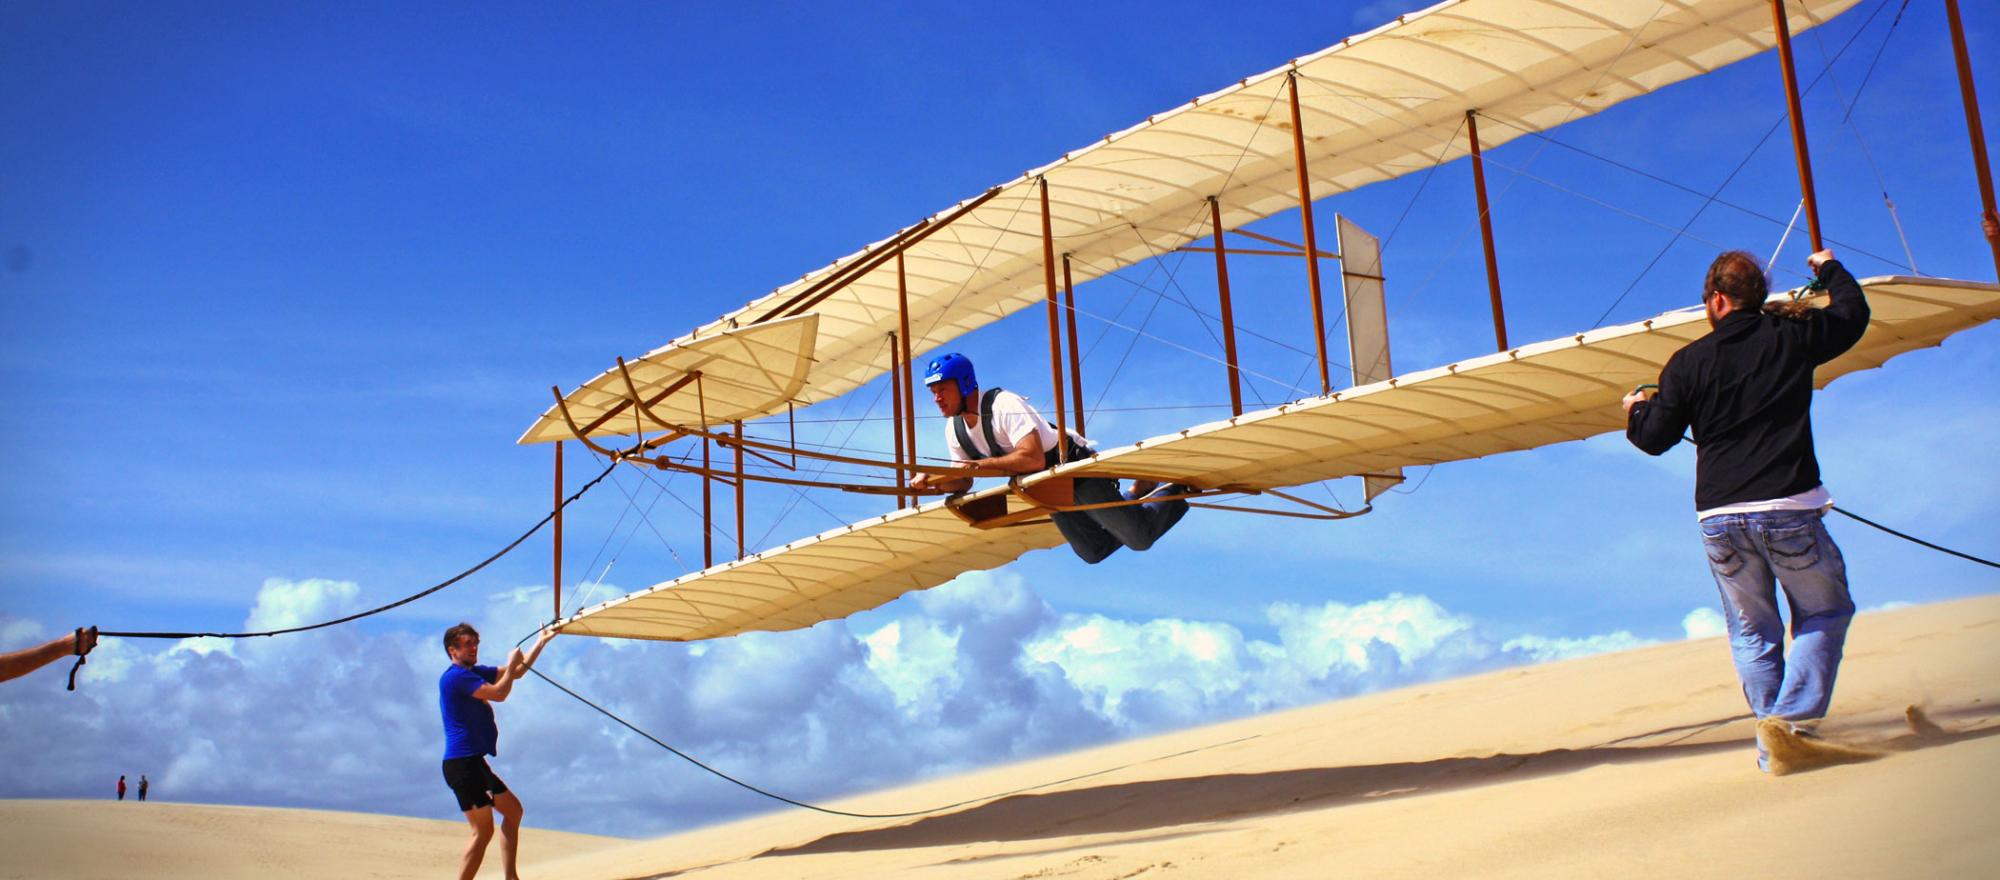 Now you can soar over the dunes in Kitty Hawk, North Carolina, just as Orville and Wilbur did more than a century ago, aboard an exact reproduction of their 1902 glider.